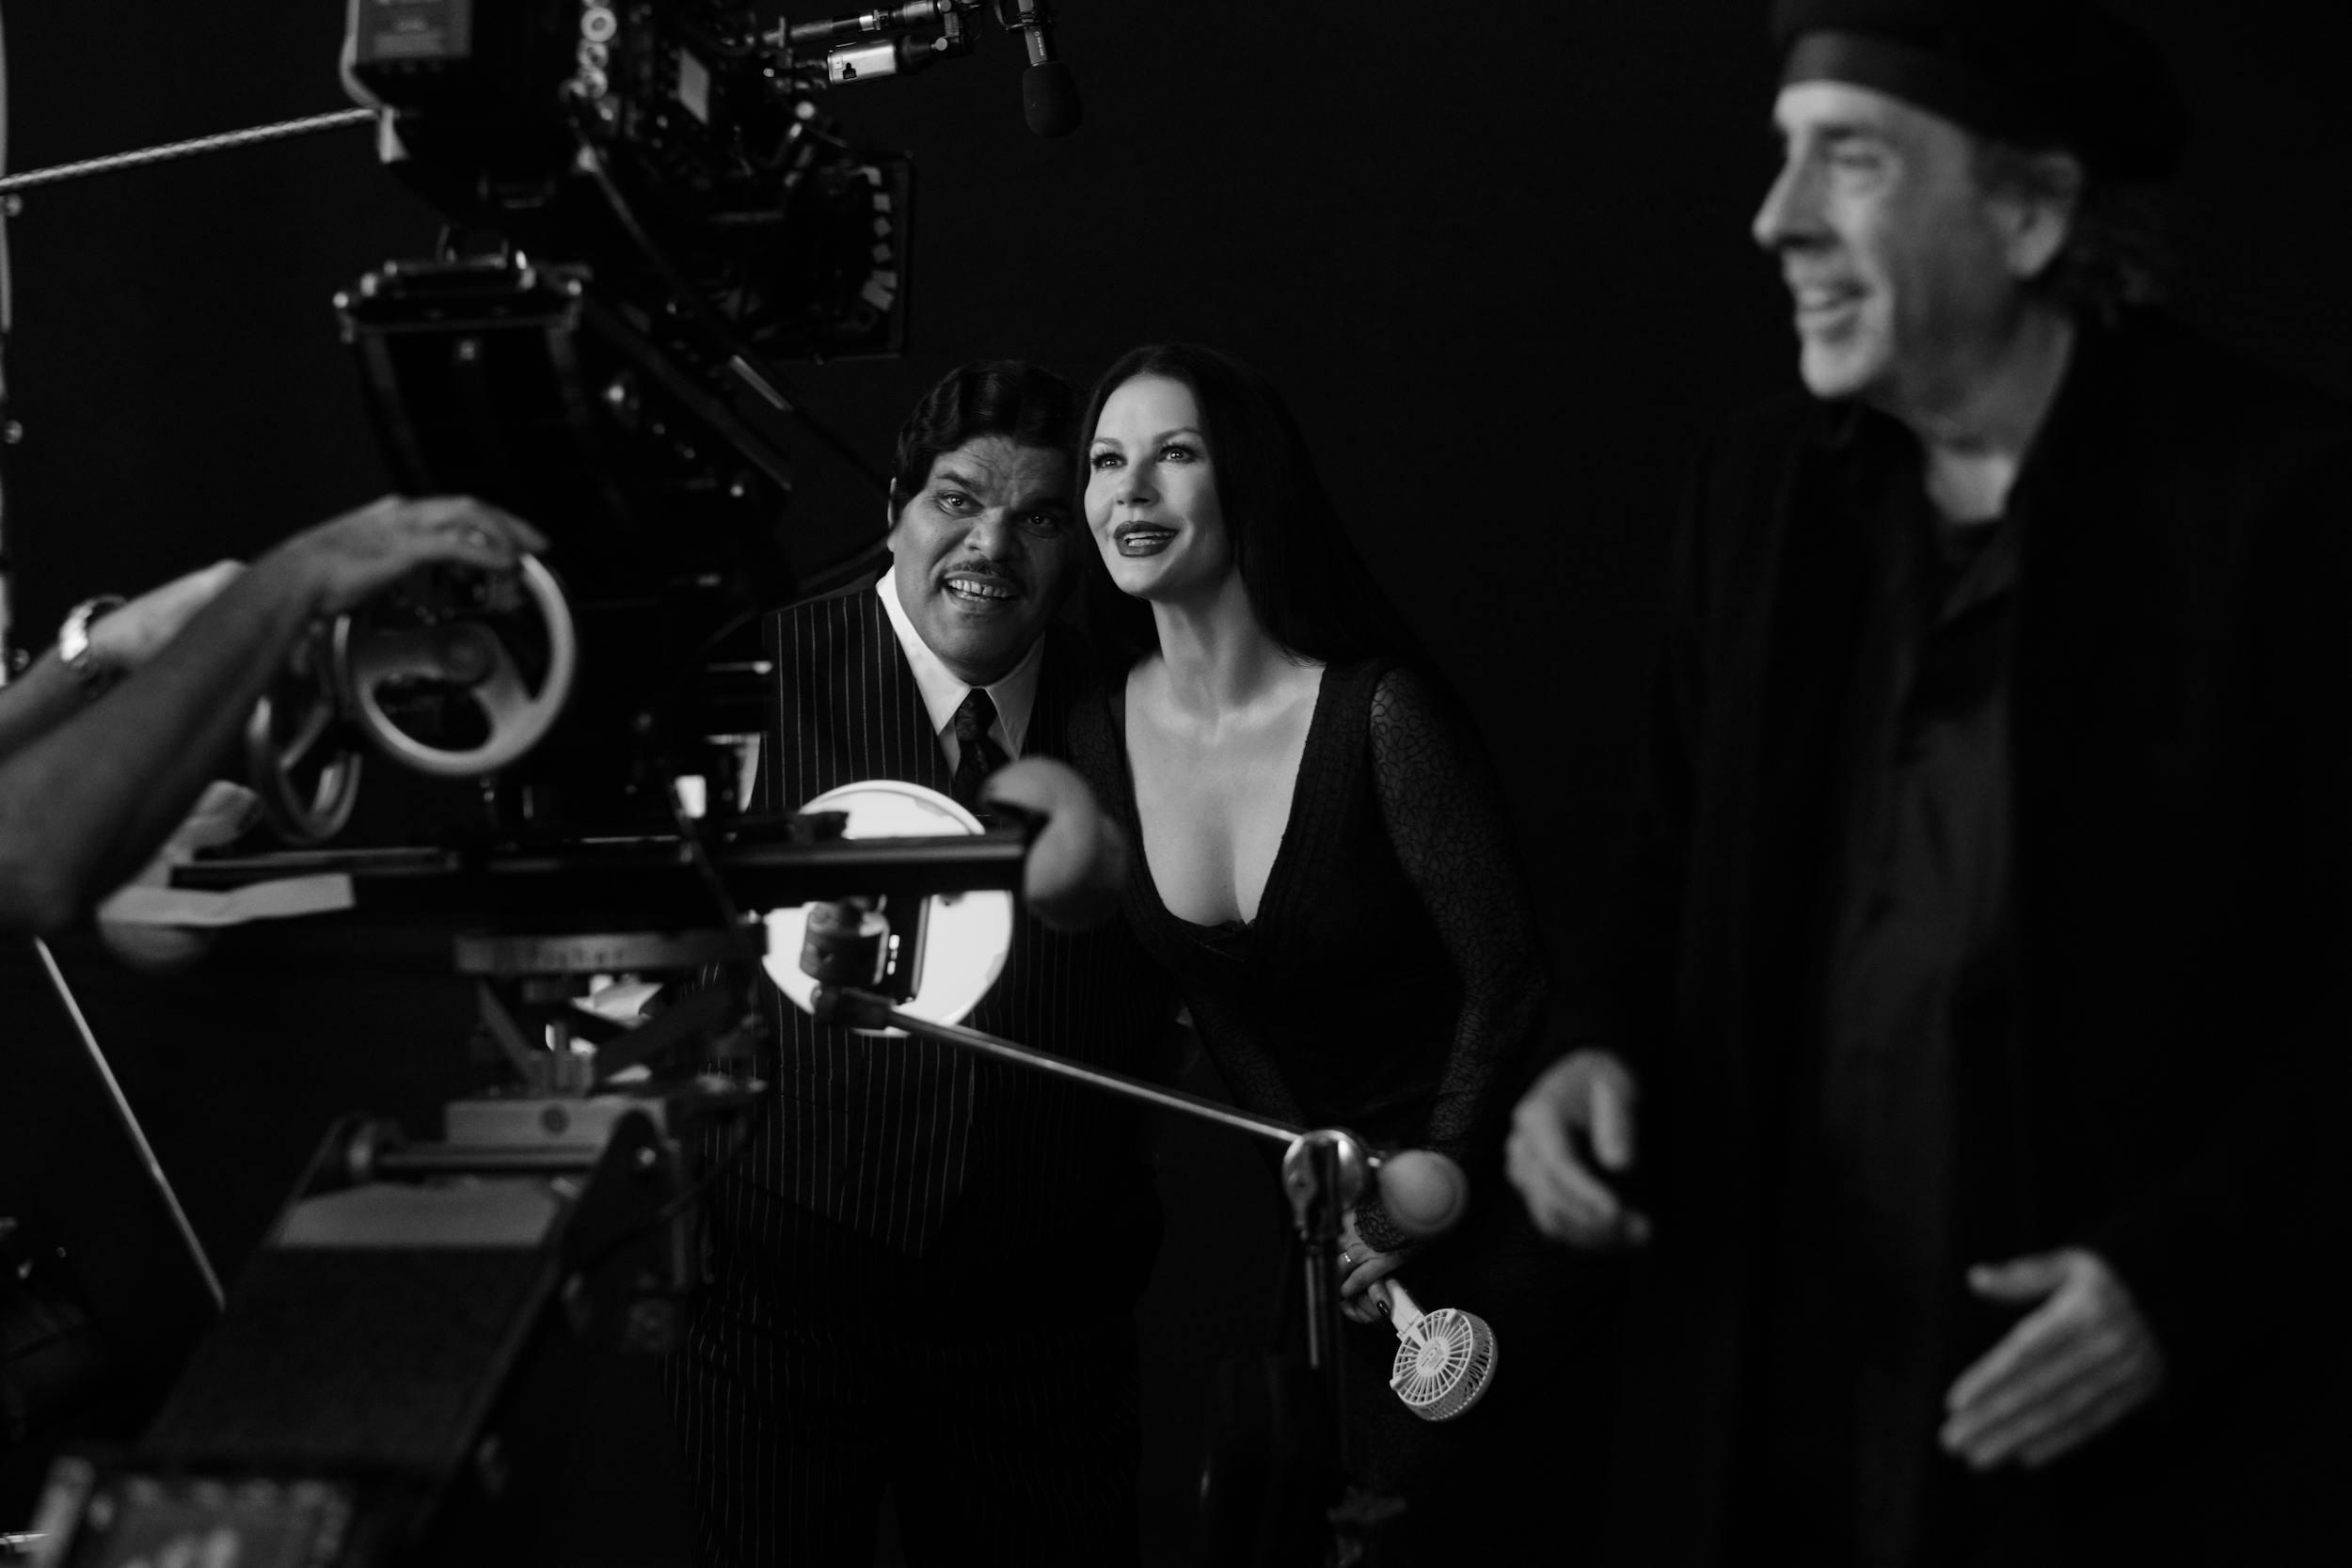 Luis Guzmán and Catherine Zeta-Jones crouch together in costume, and Tim Burton directs the camera from the side .